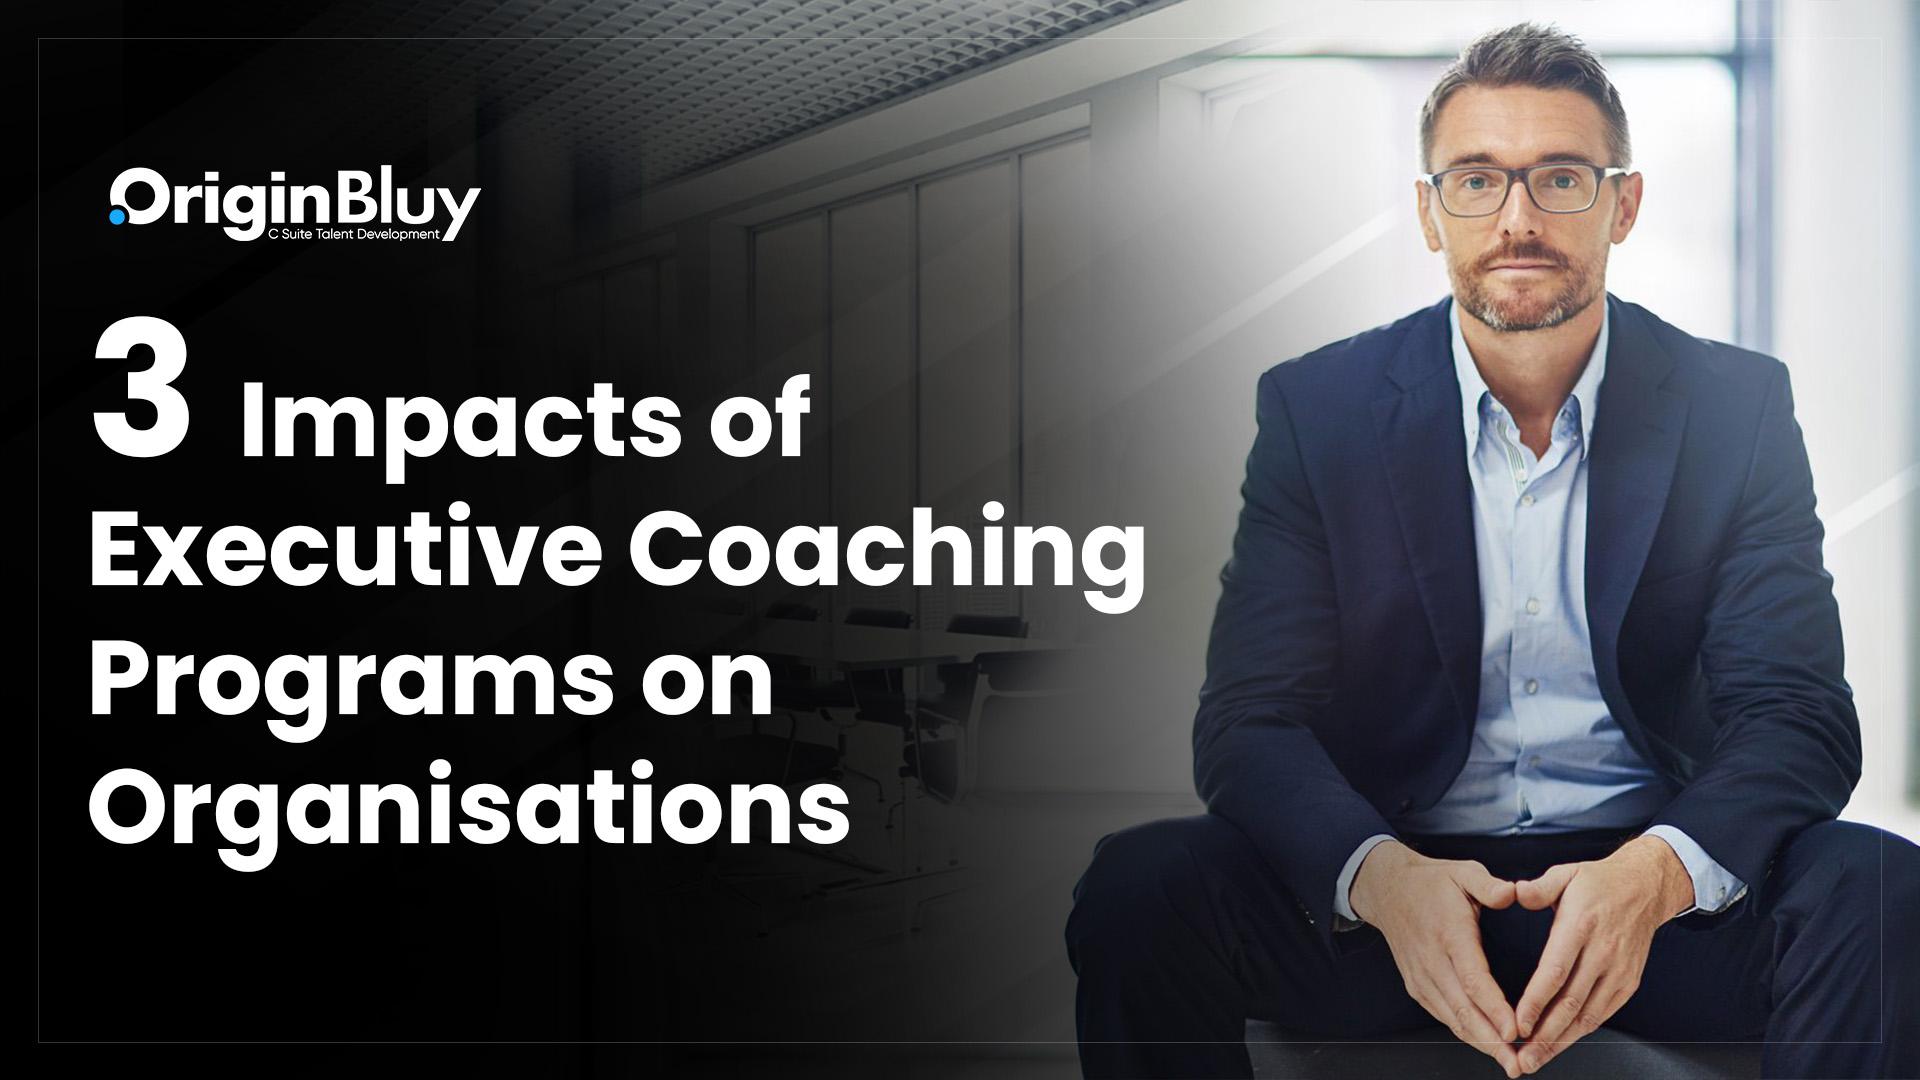 Impacts of Executive Coaching Programs on Organisations 